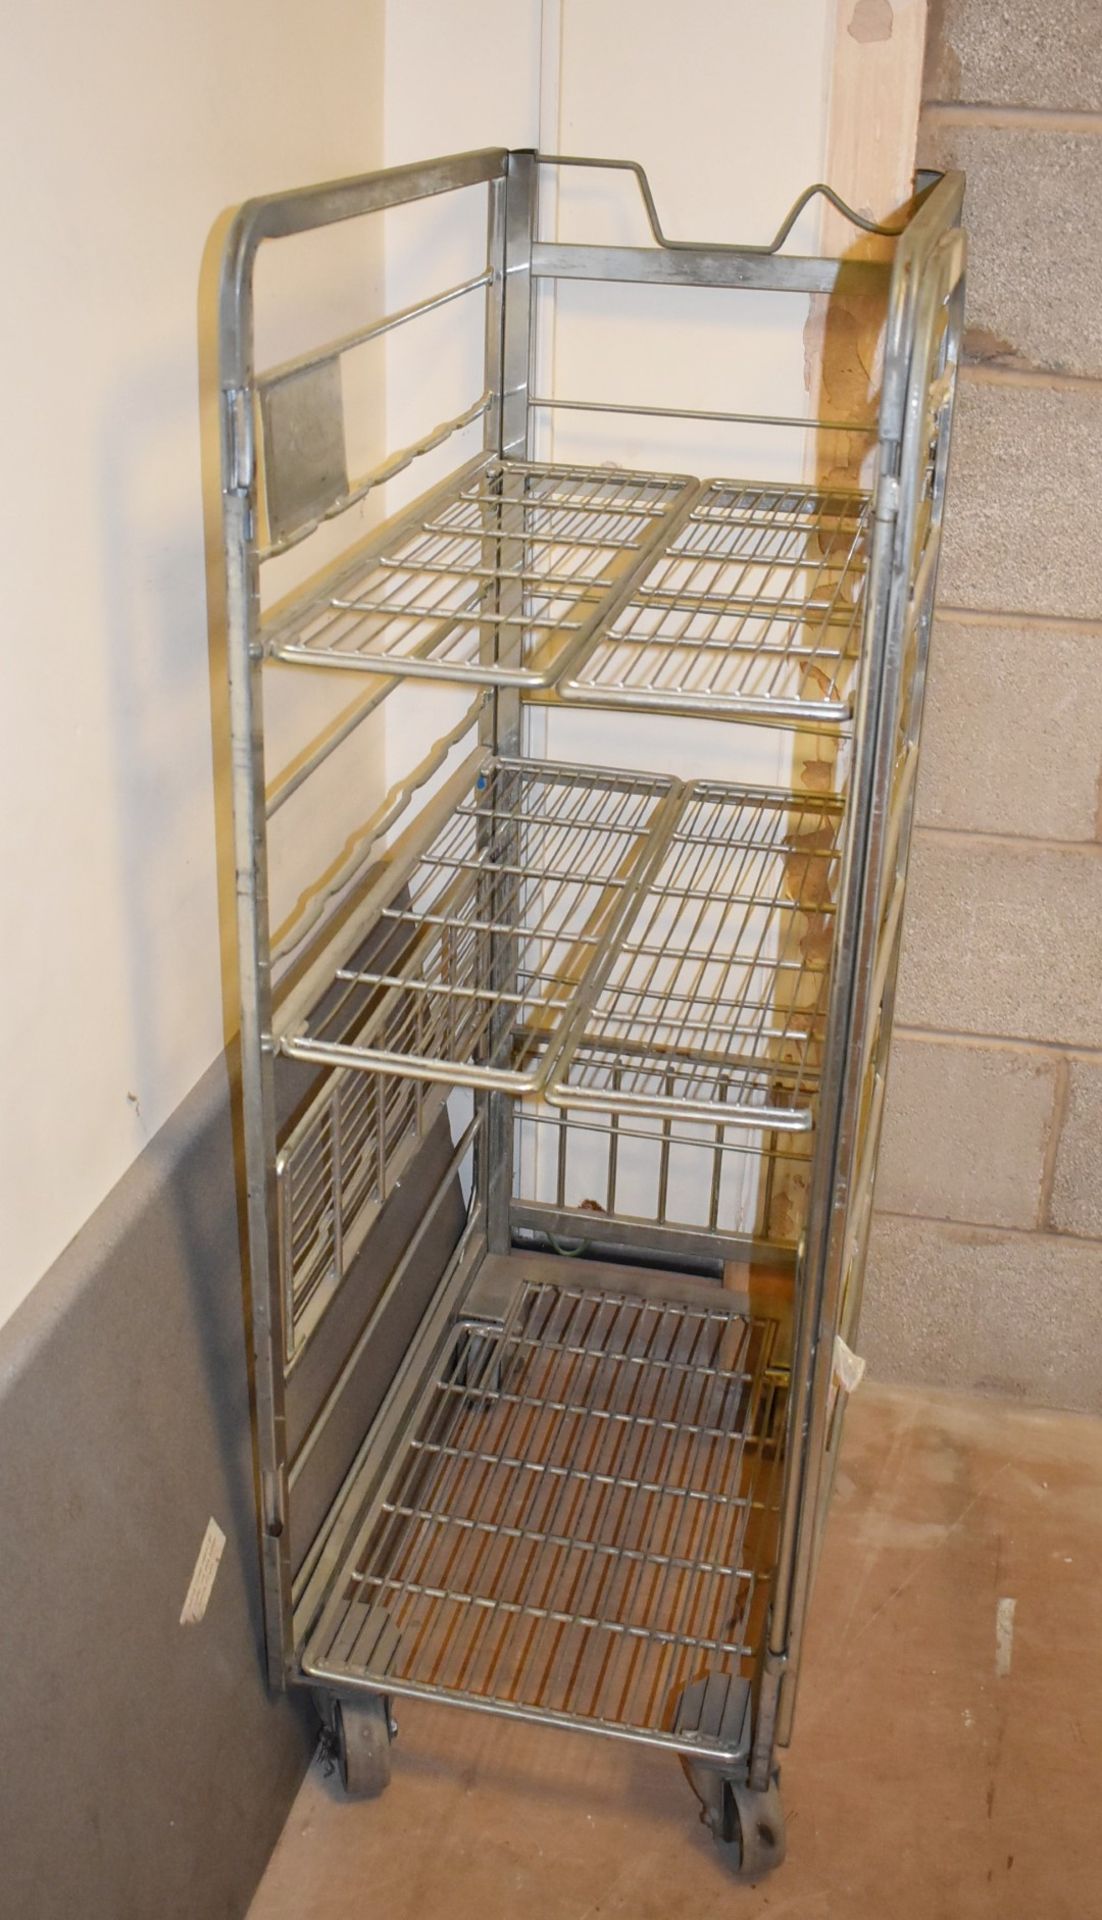 2 x Metal Milk Cage Trolleys - Ref: AC140 GFBR - CL646 - Location: Manchester, M12 Collection - Image 4 of 4